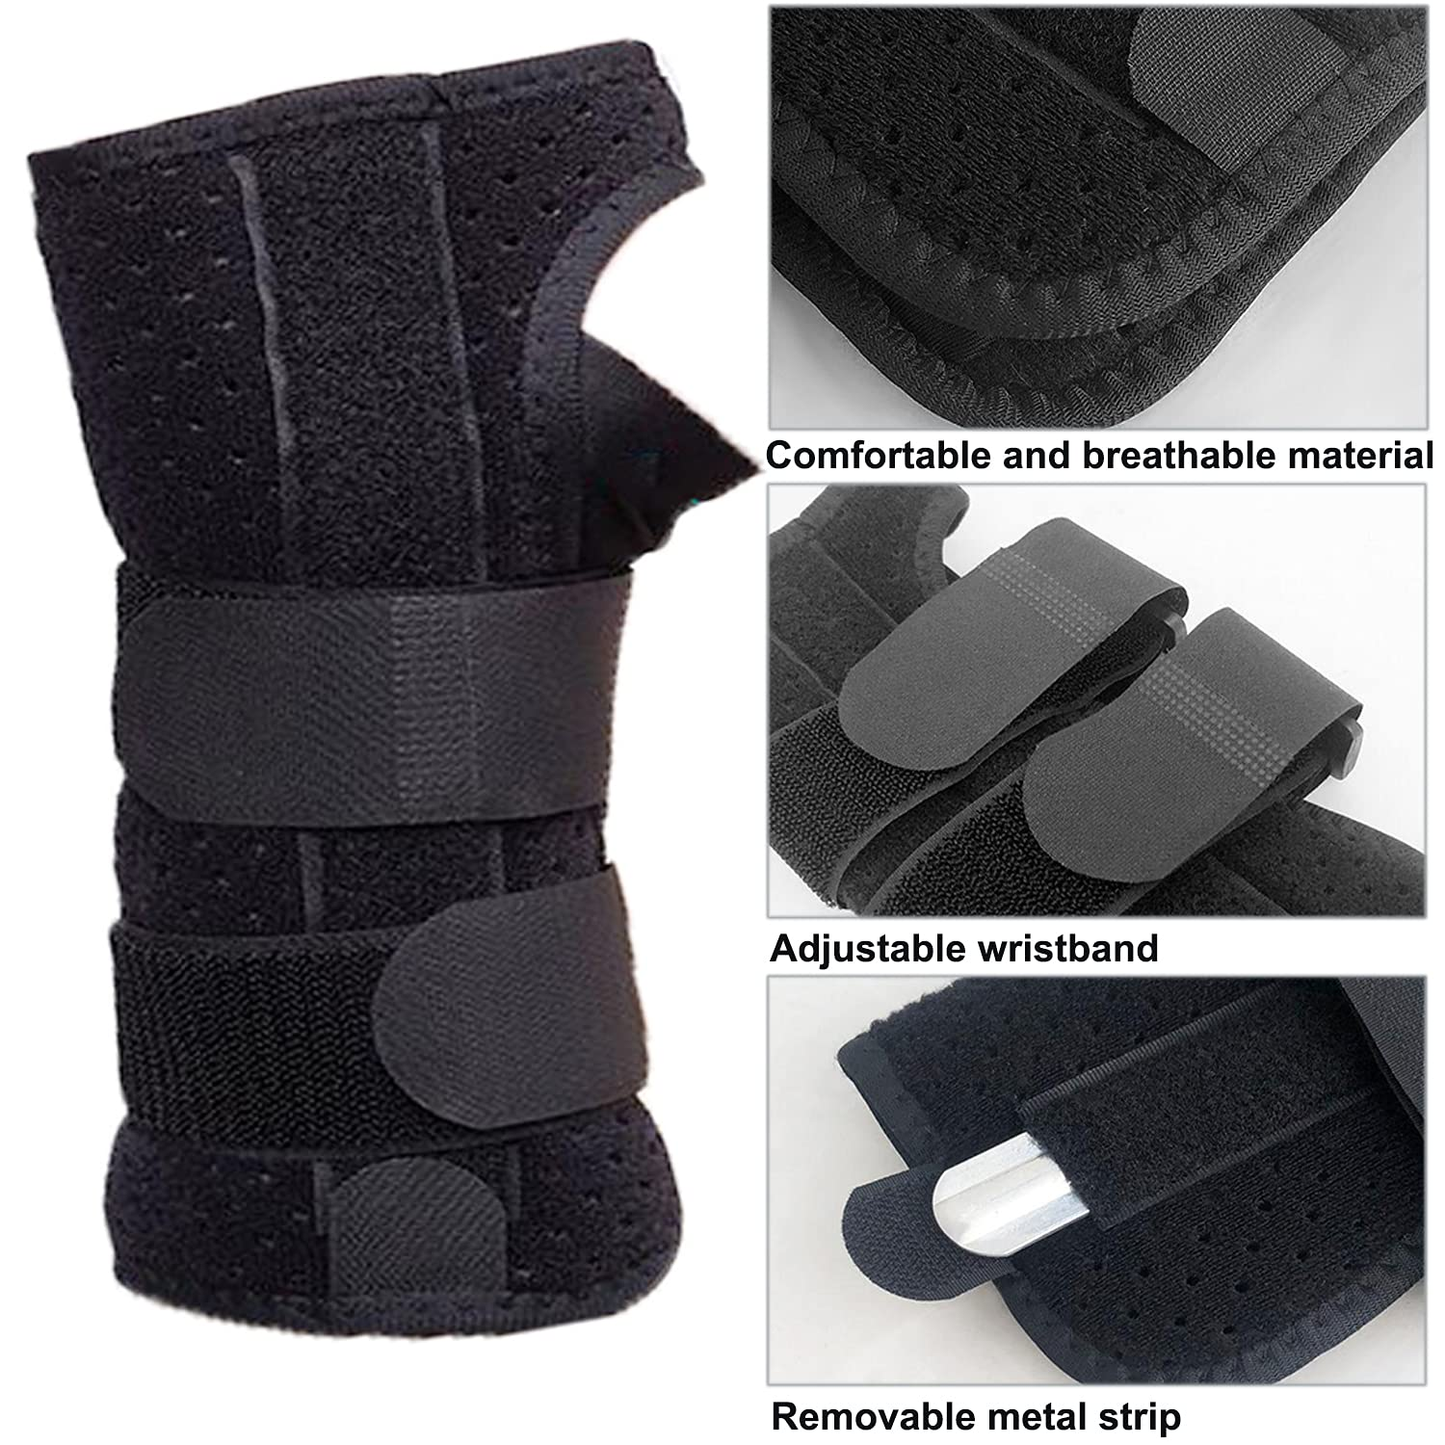 Wrist Support Brace Adjustable & Breathable Wrist Splint-Lightweight Splint with Cushioned Pads for Carpal Tunnel, Relief Pain, Tendonitis, Arthritis